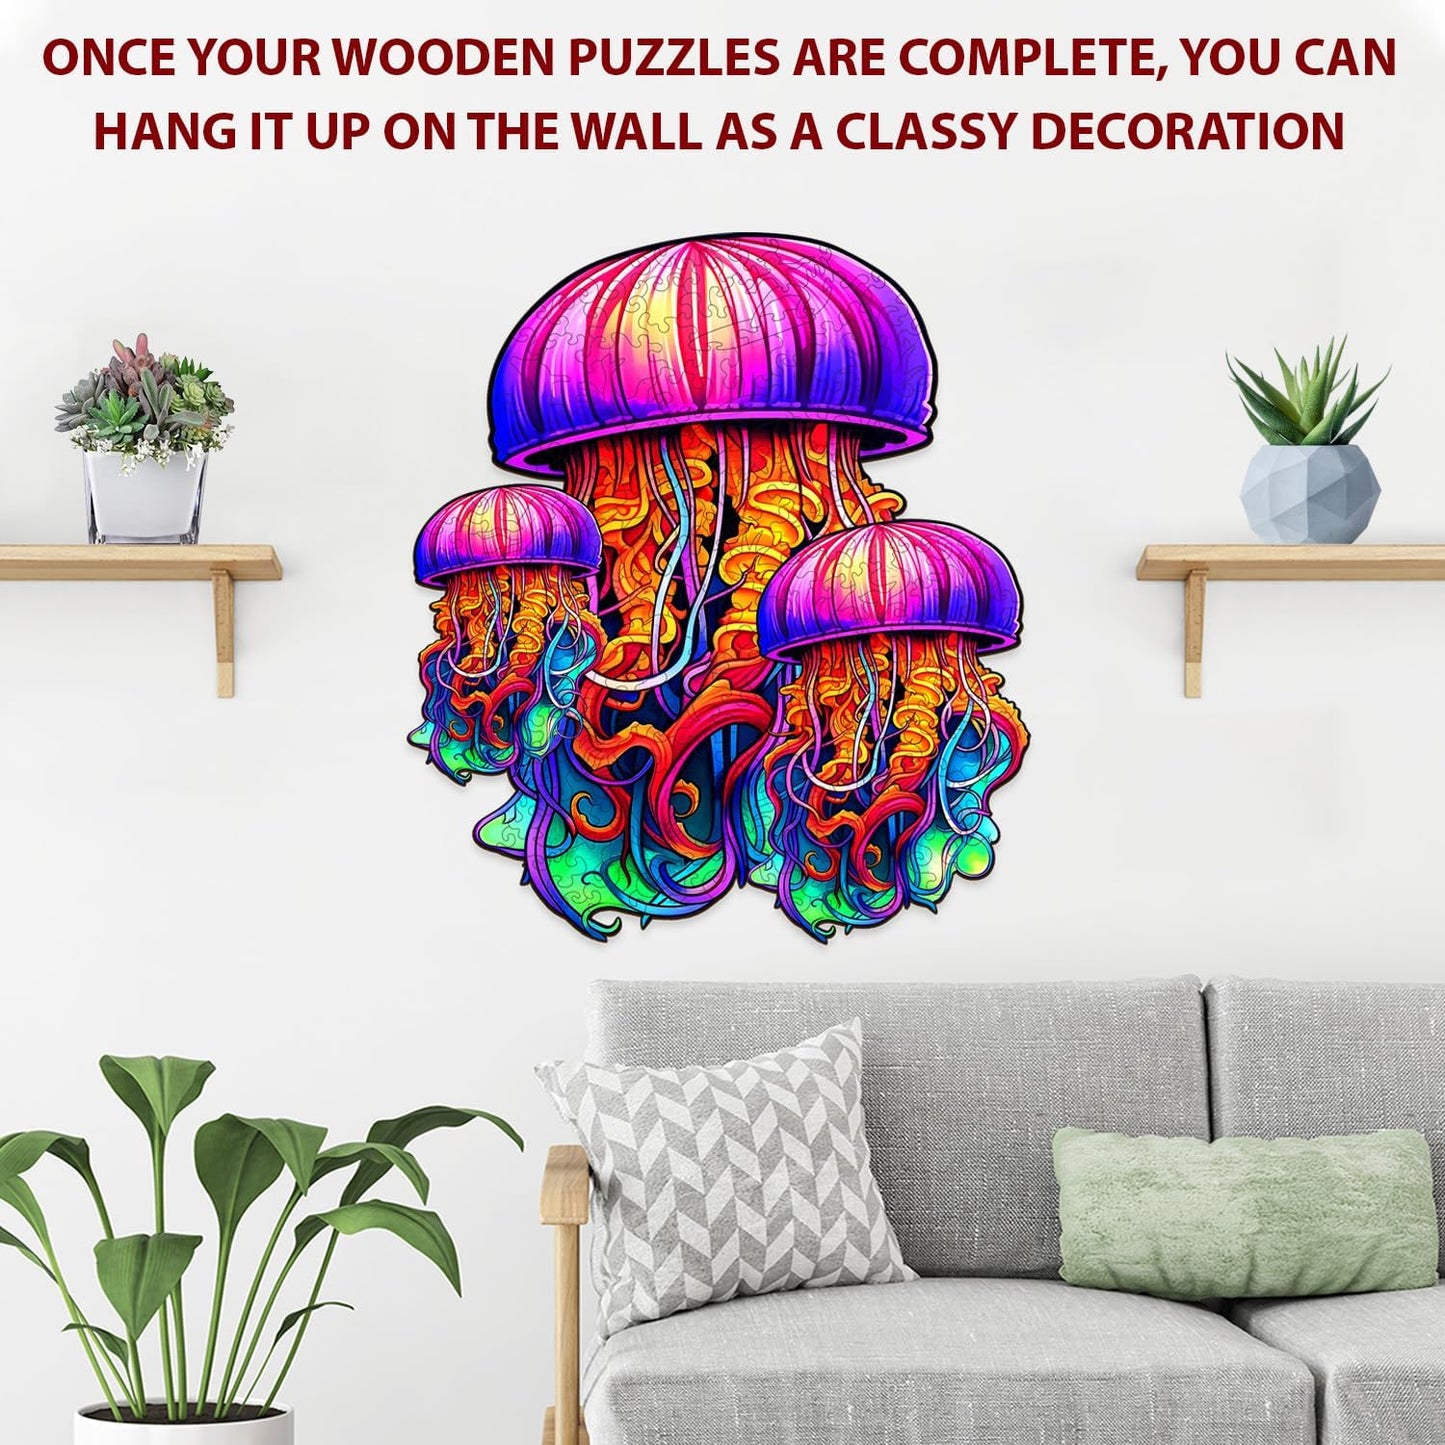 Jellyfish wooden jigsaw puzzle